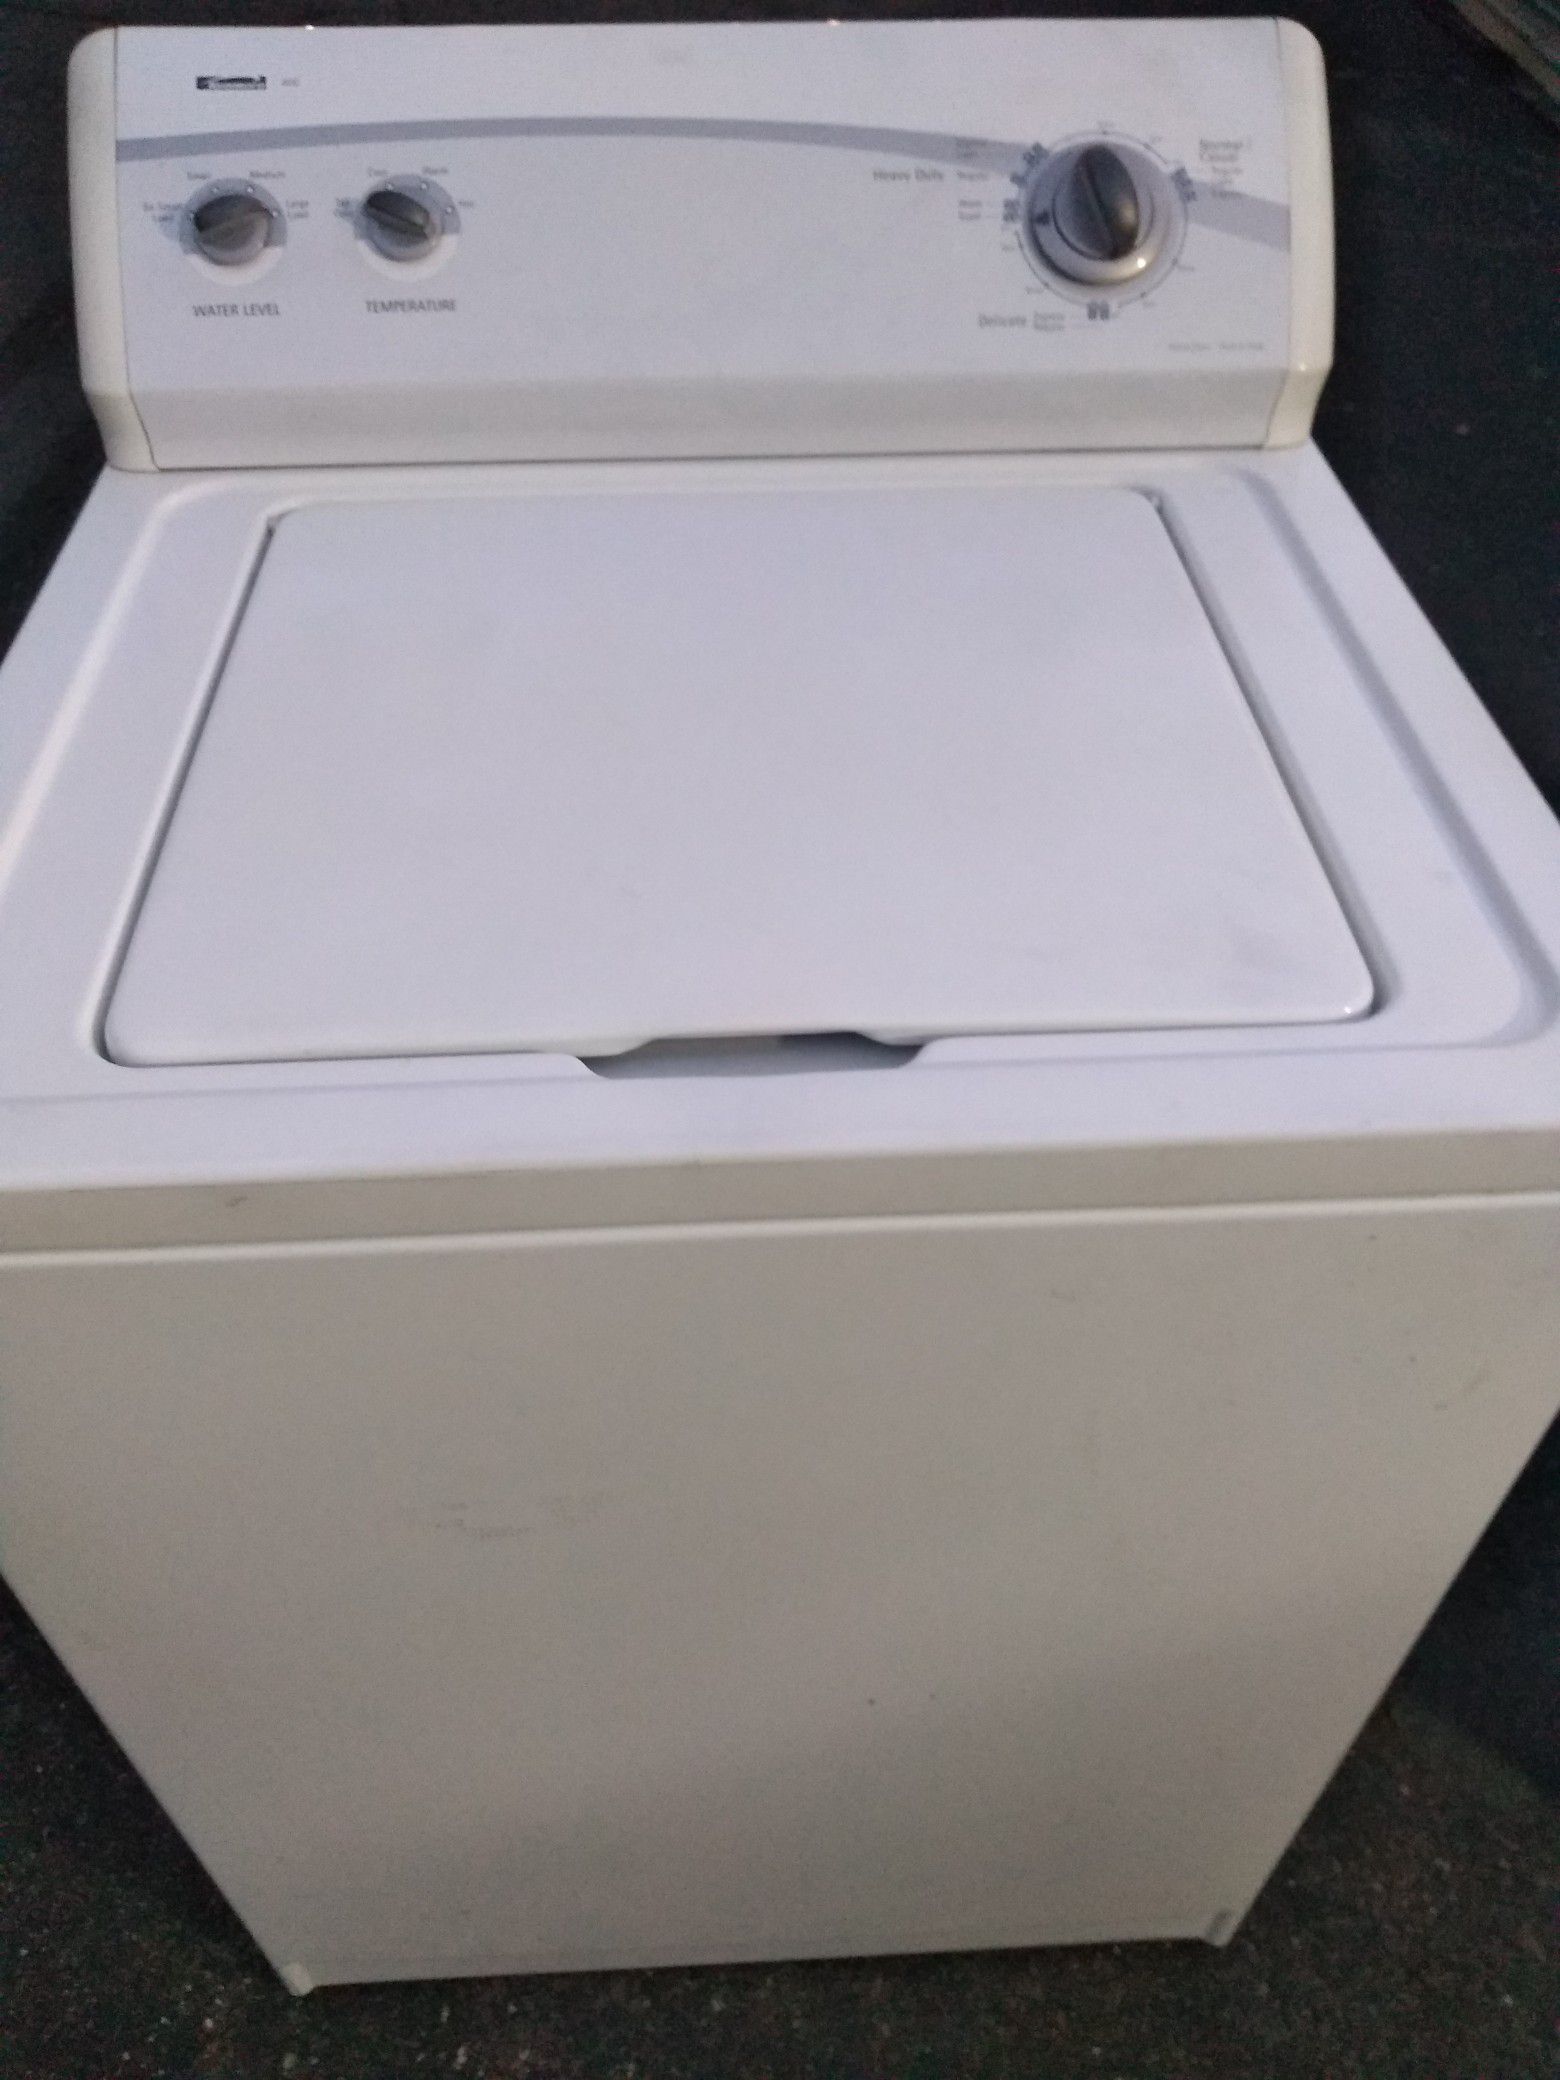 Kenmore electric washer heavy duty super capacity excellent new condition and ready to use curbside delivery or pickup is possible